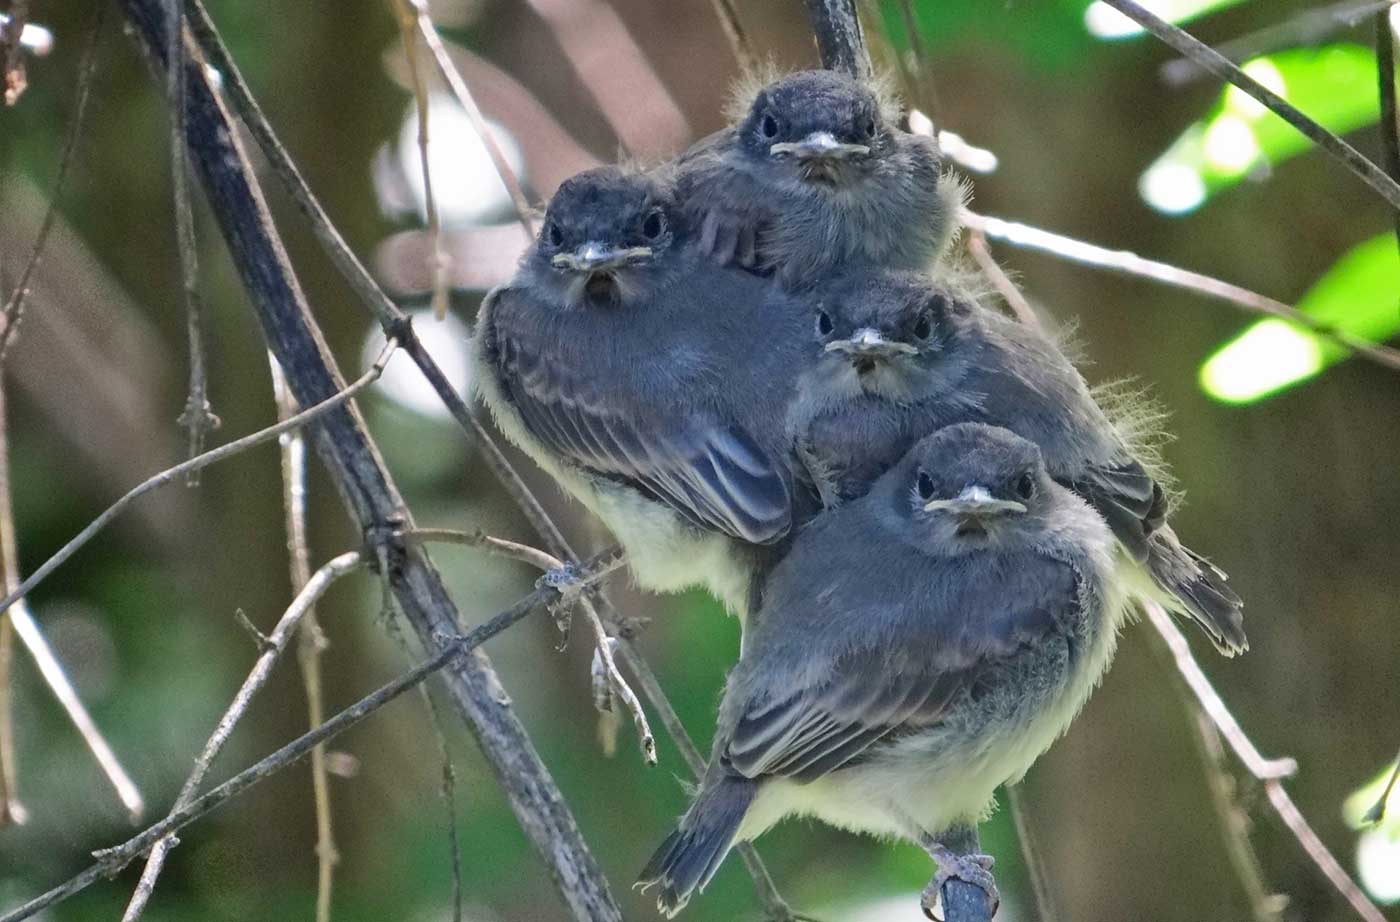 Young birds in tree huddled together